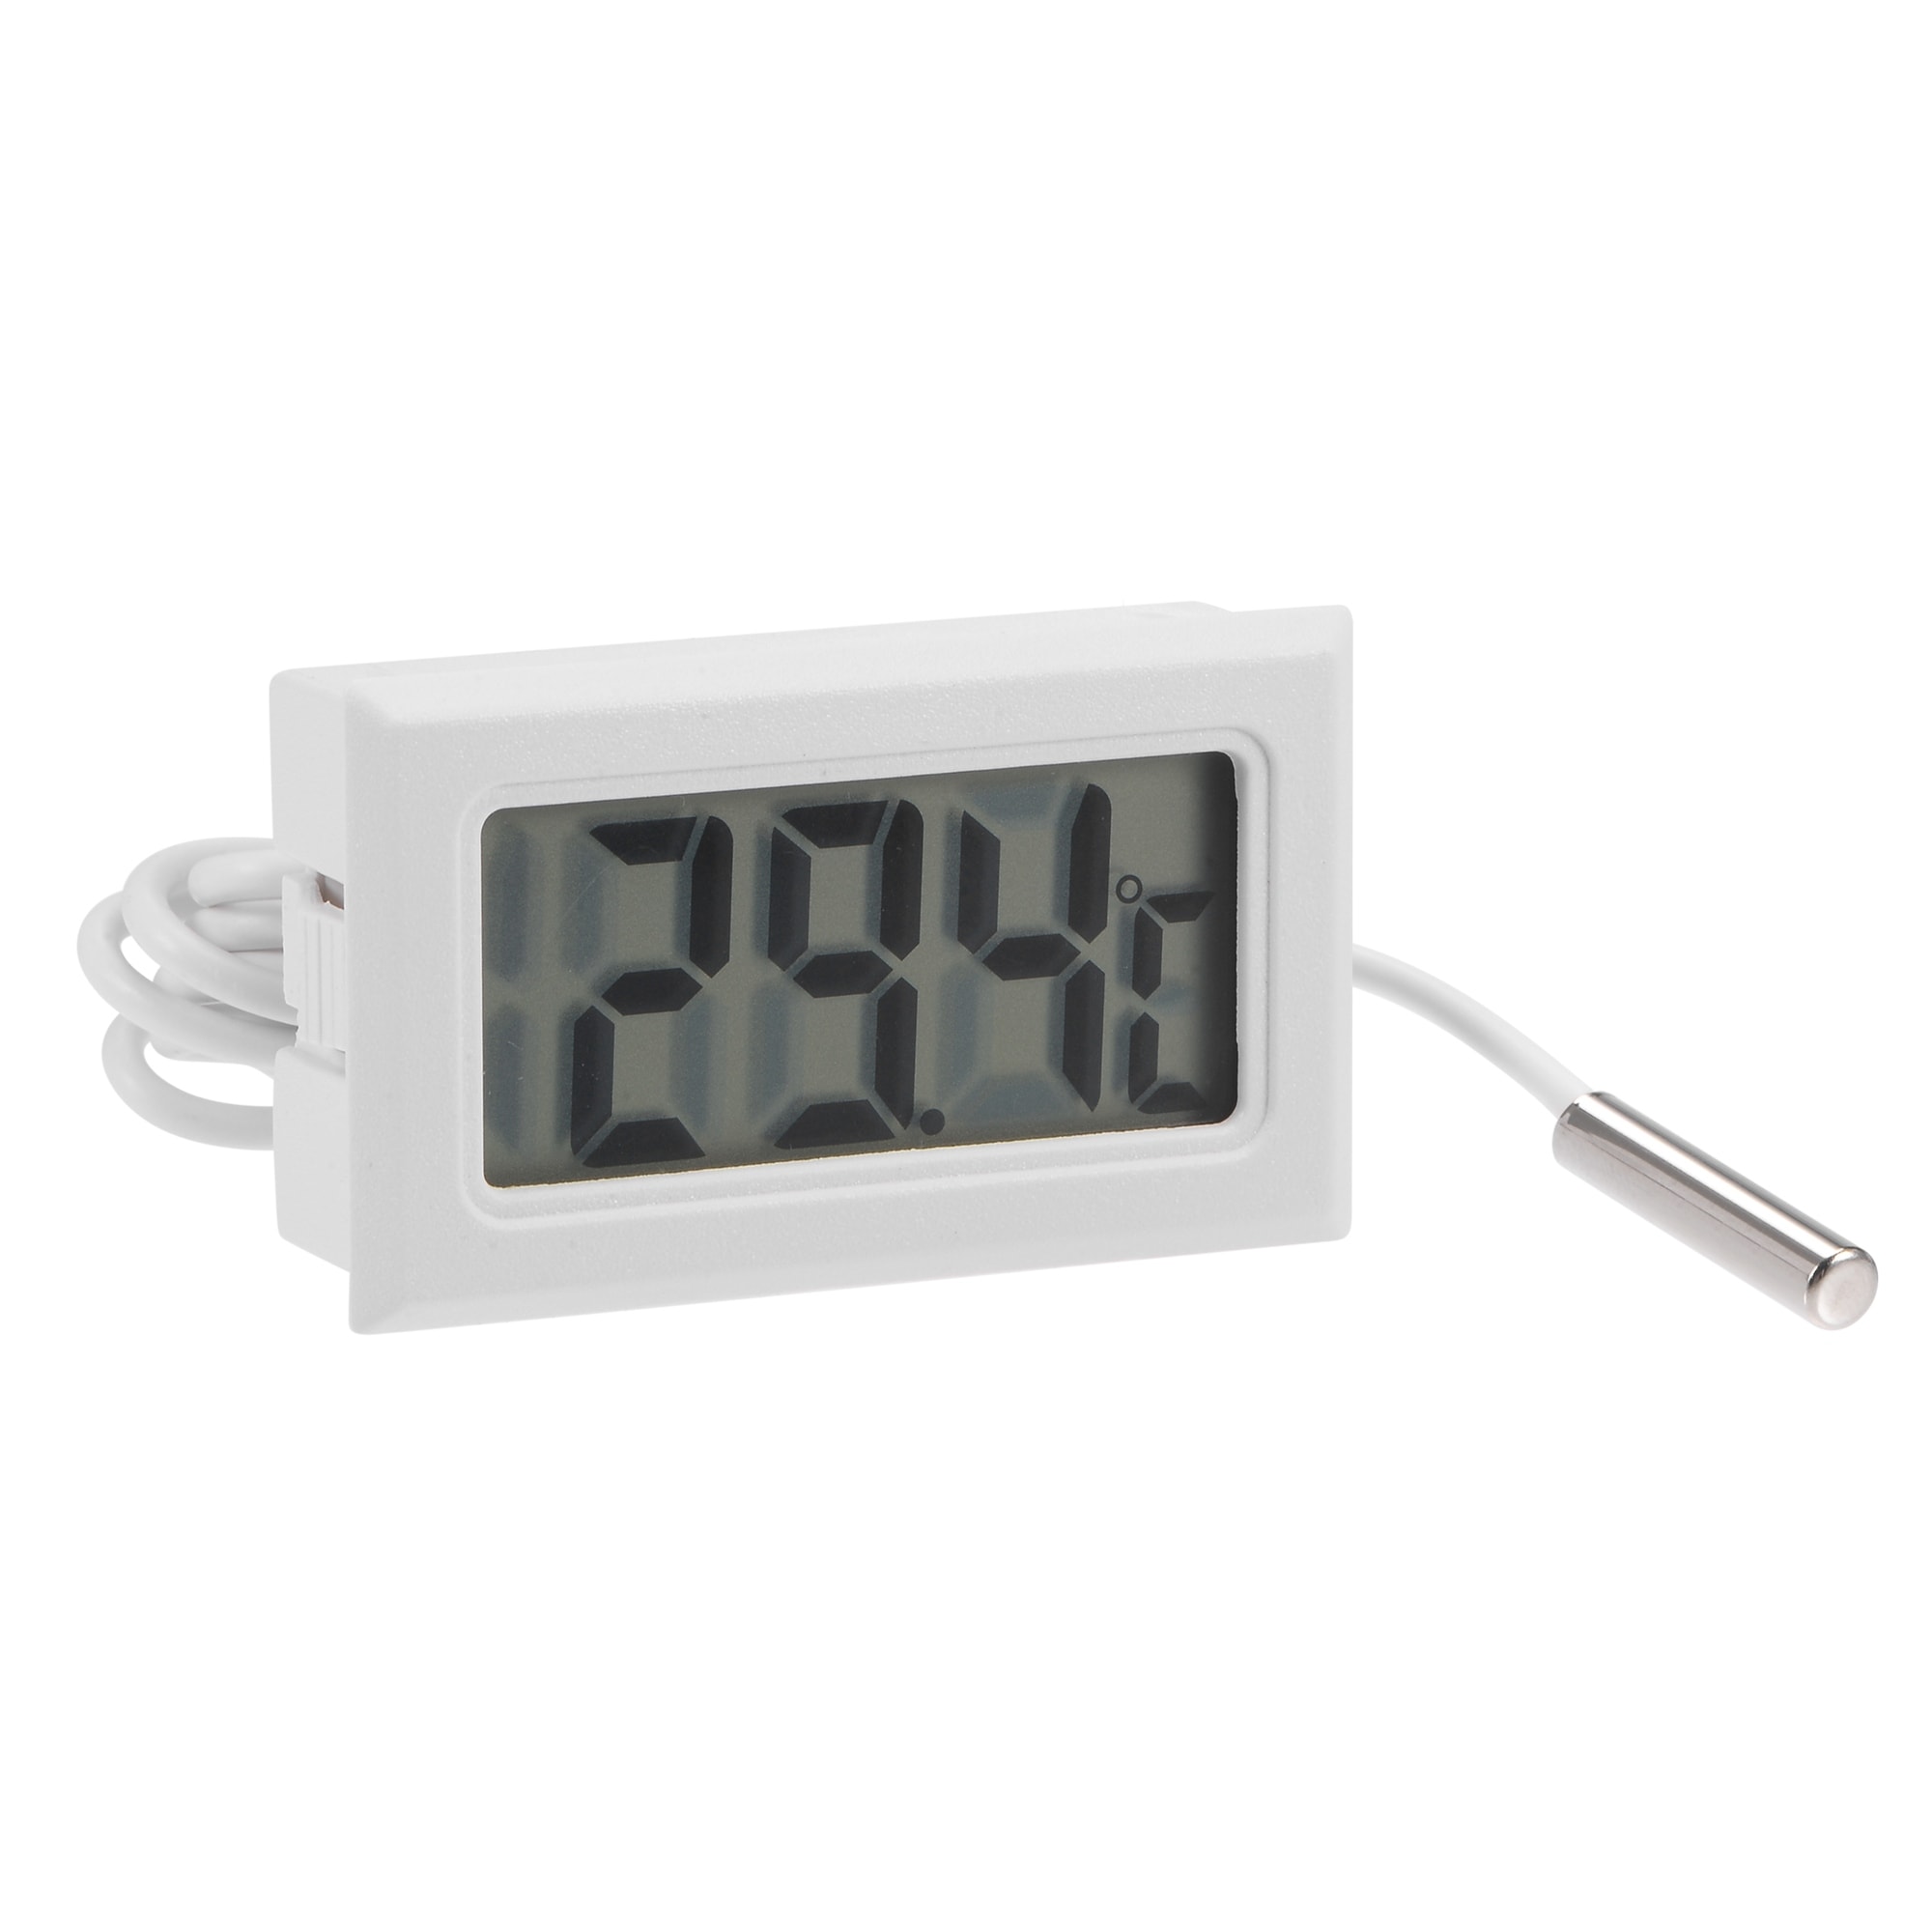 https://ak1.ostkcdn.com/images/products/is/images/direct/5b1106eccd94e269fd58228d904052355c60e638/Digital-Thermometer--50-to-110-Degree-10K-w-2m-Sensor-Probe-Cable.jpg